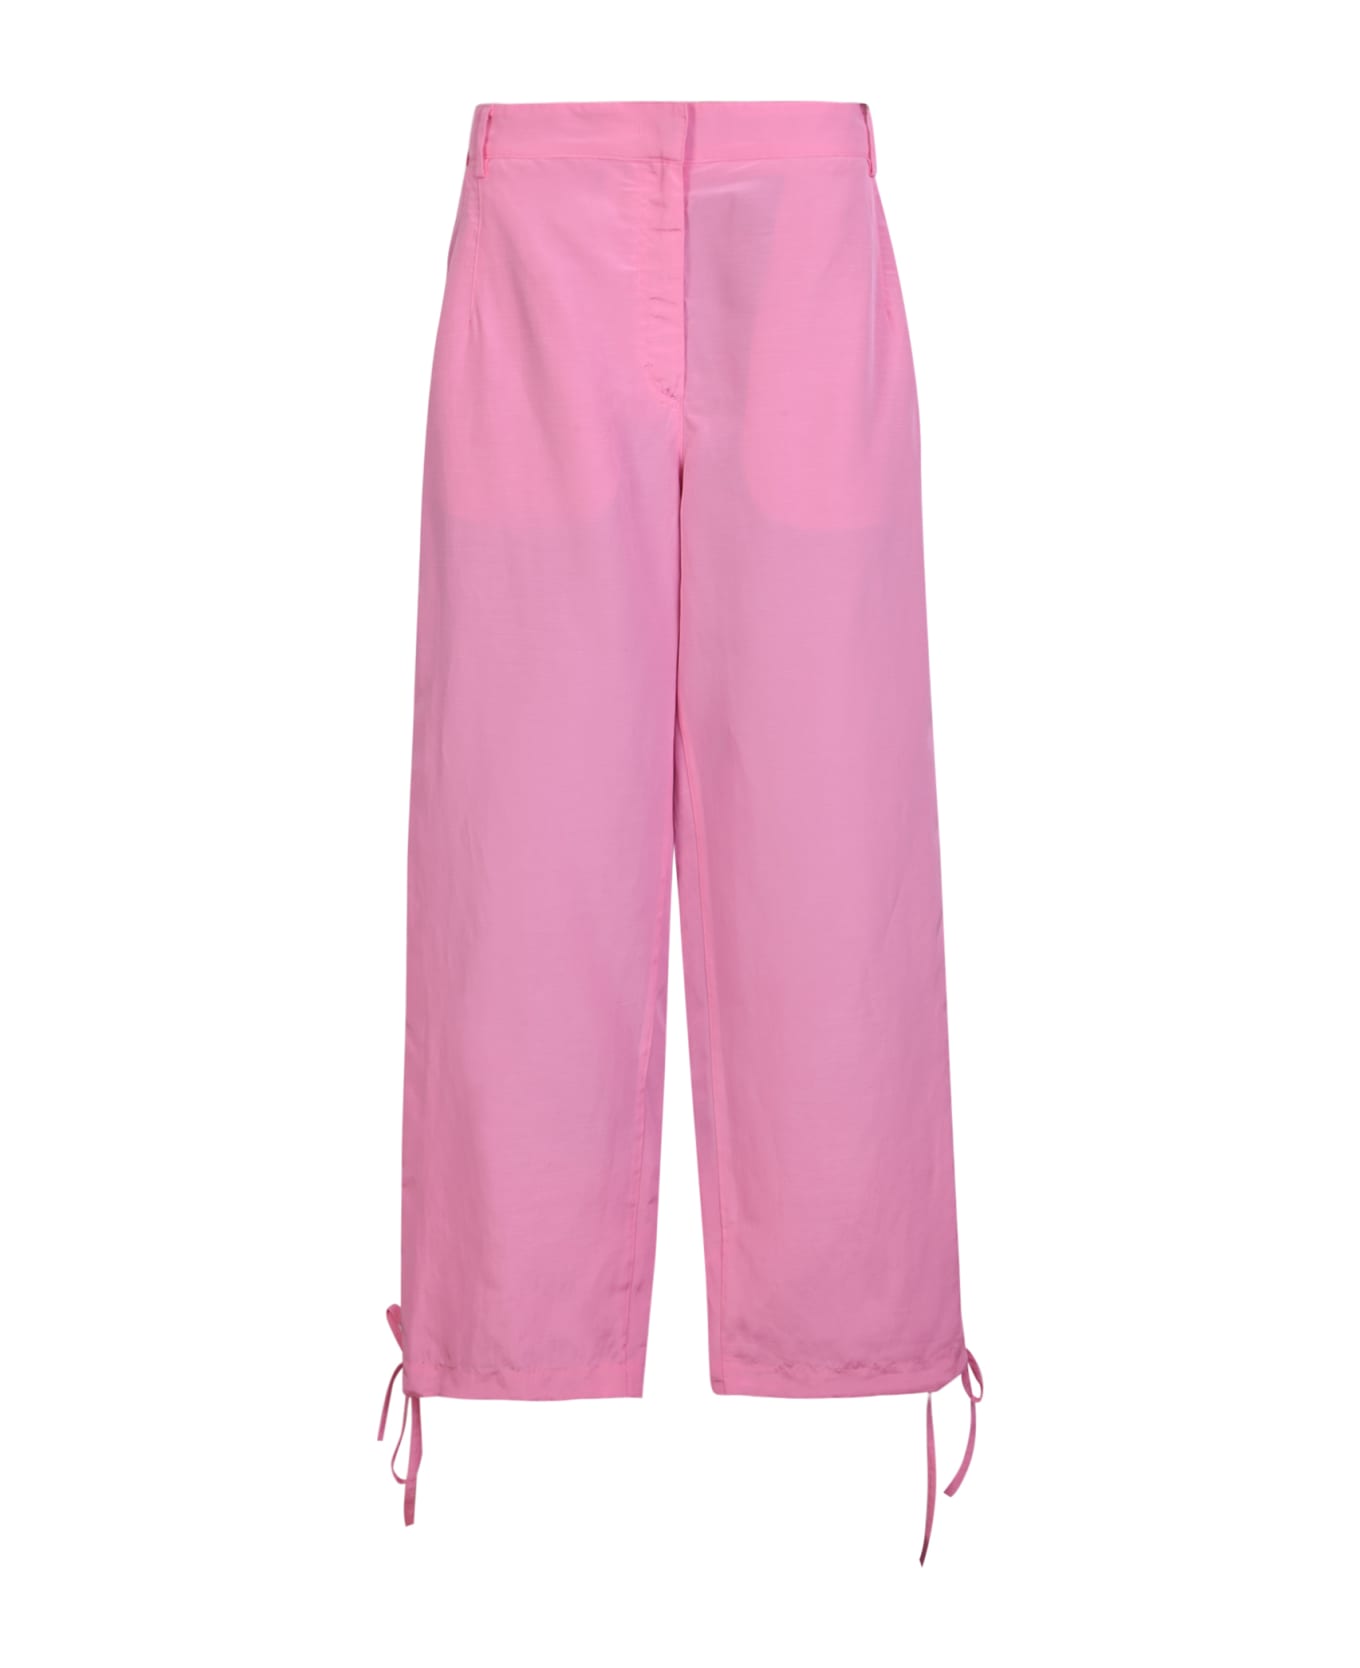 MSGM Pink Cargo Trousers - Pink ボトムス